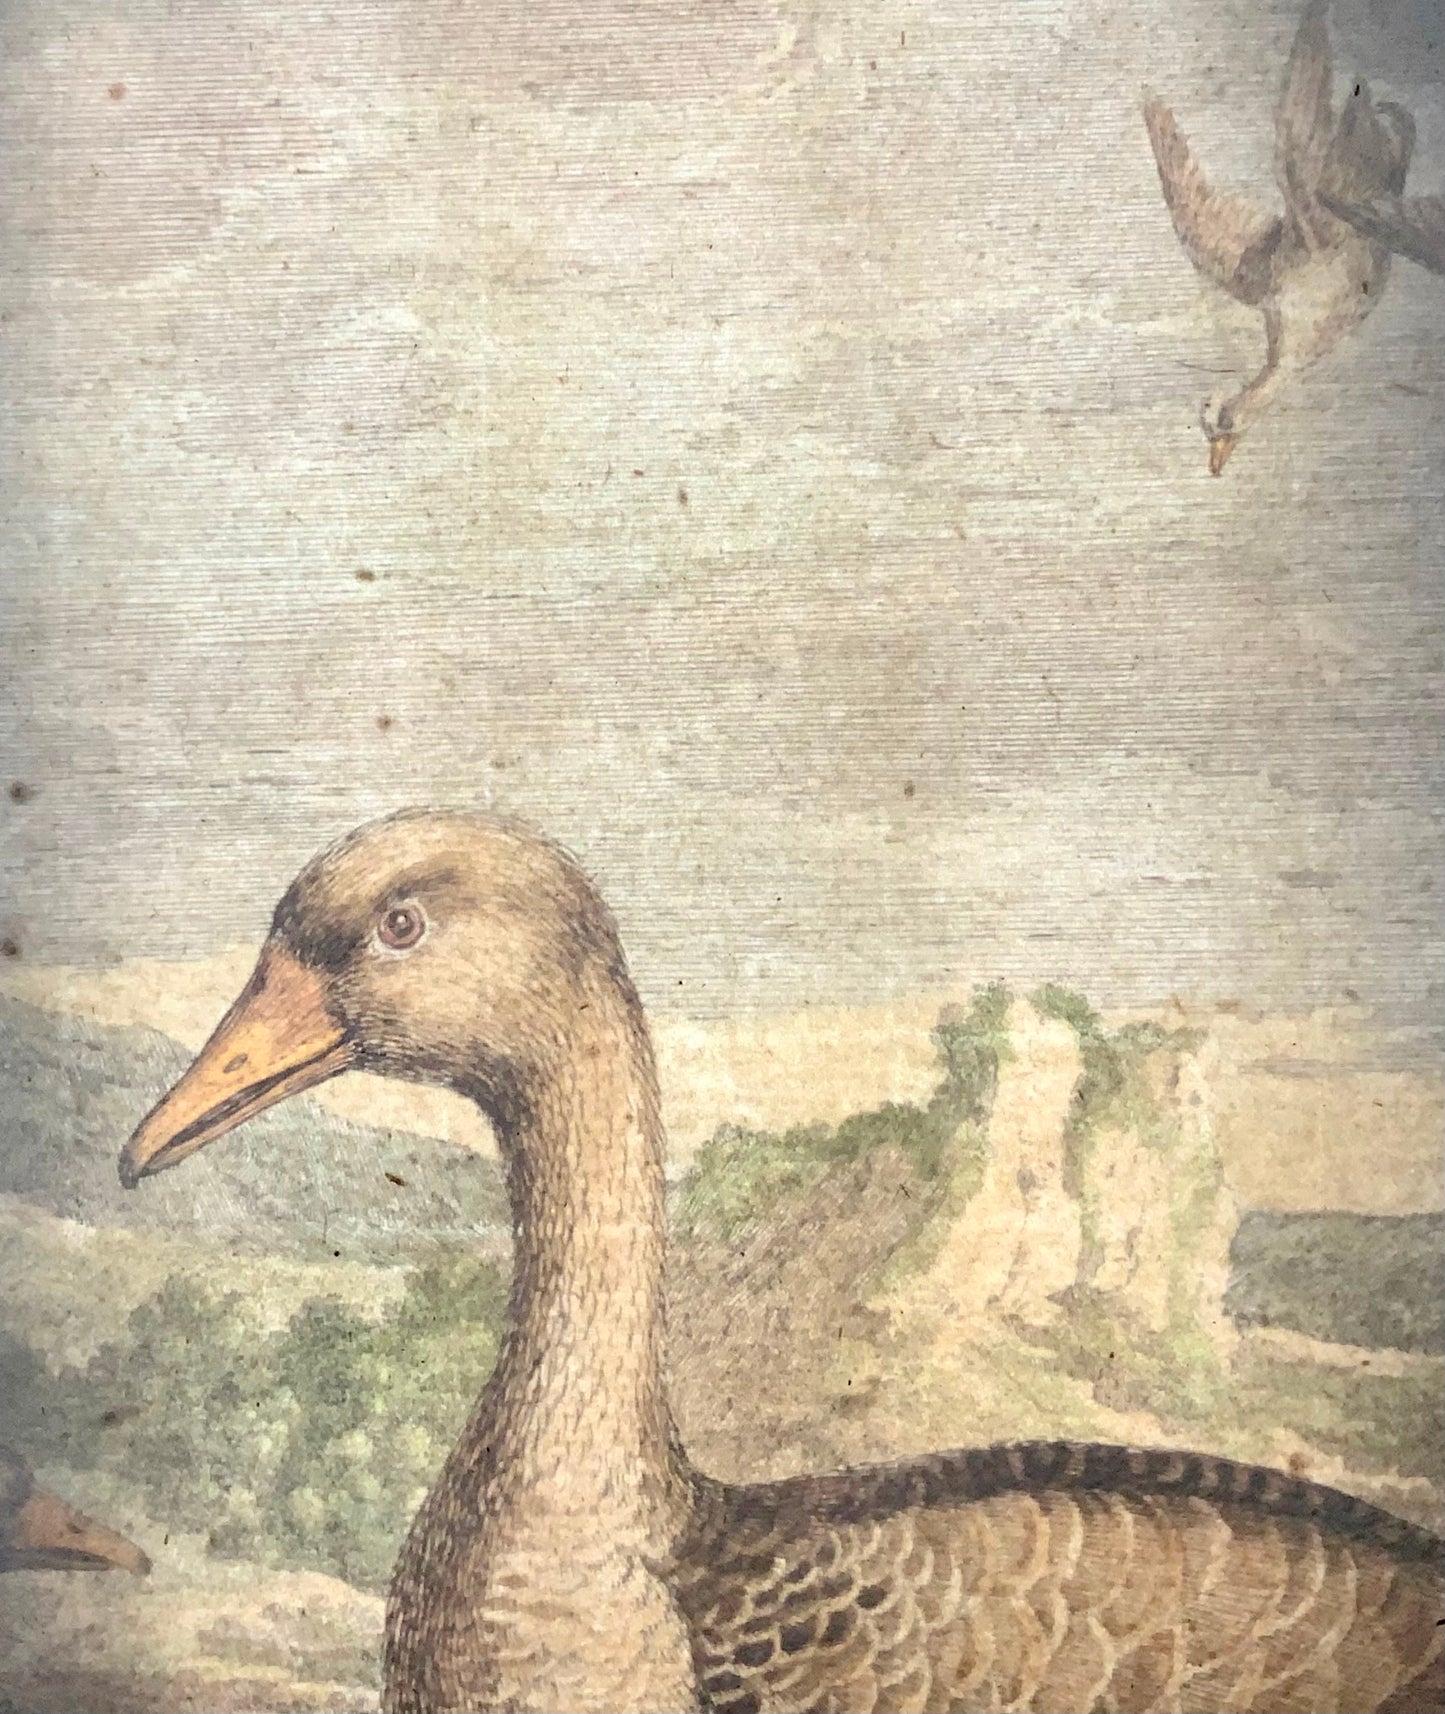 1673 Geese, Nicolas Robert (b.1614), ornithology, large folio etching in hand colour